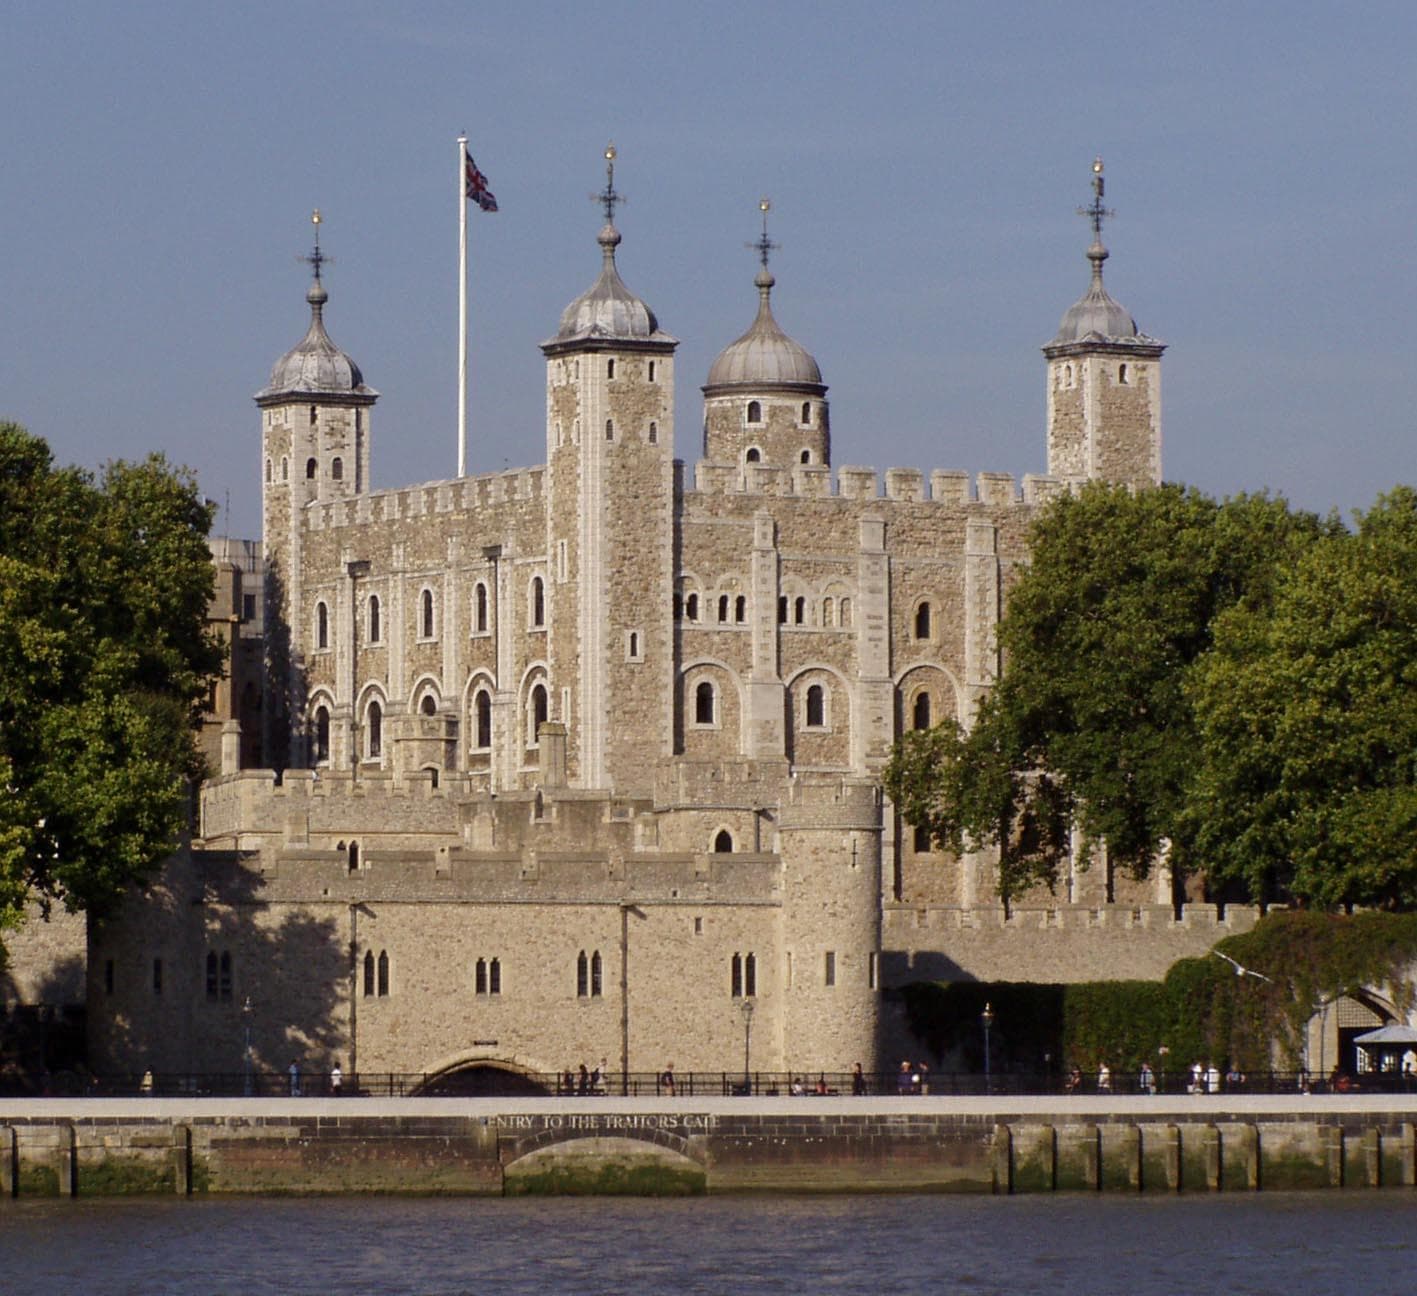 Random Top Must-See Attractions in London